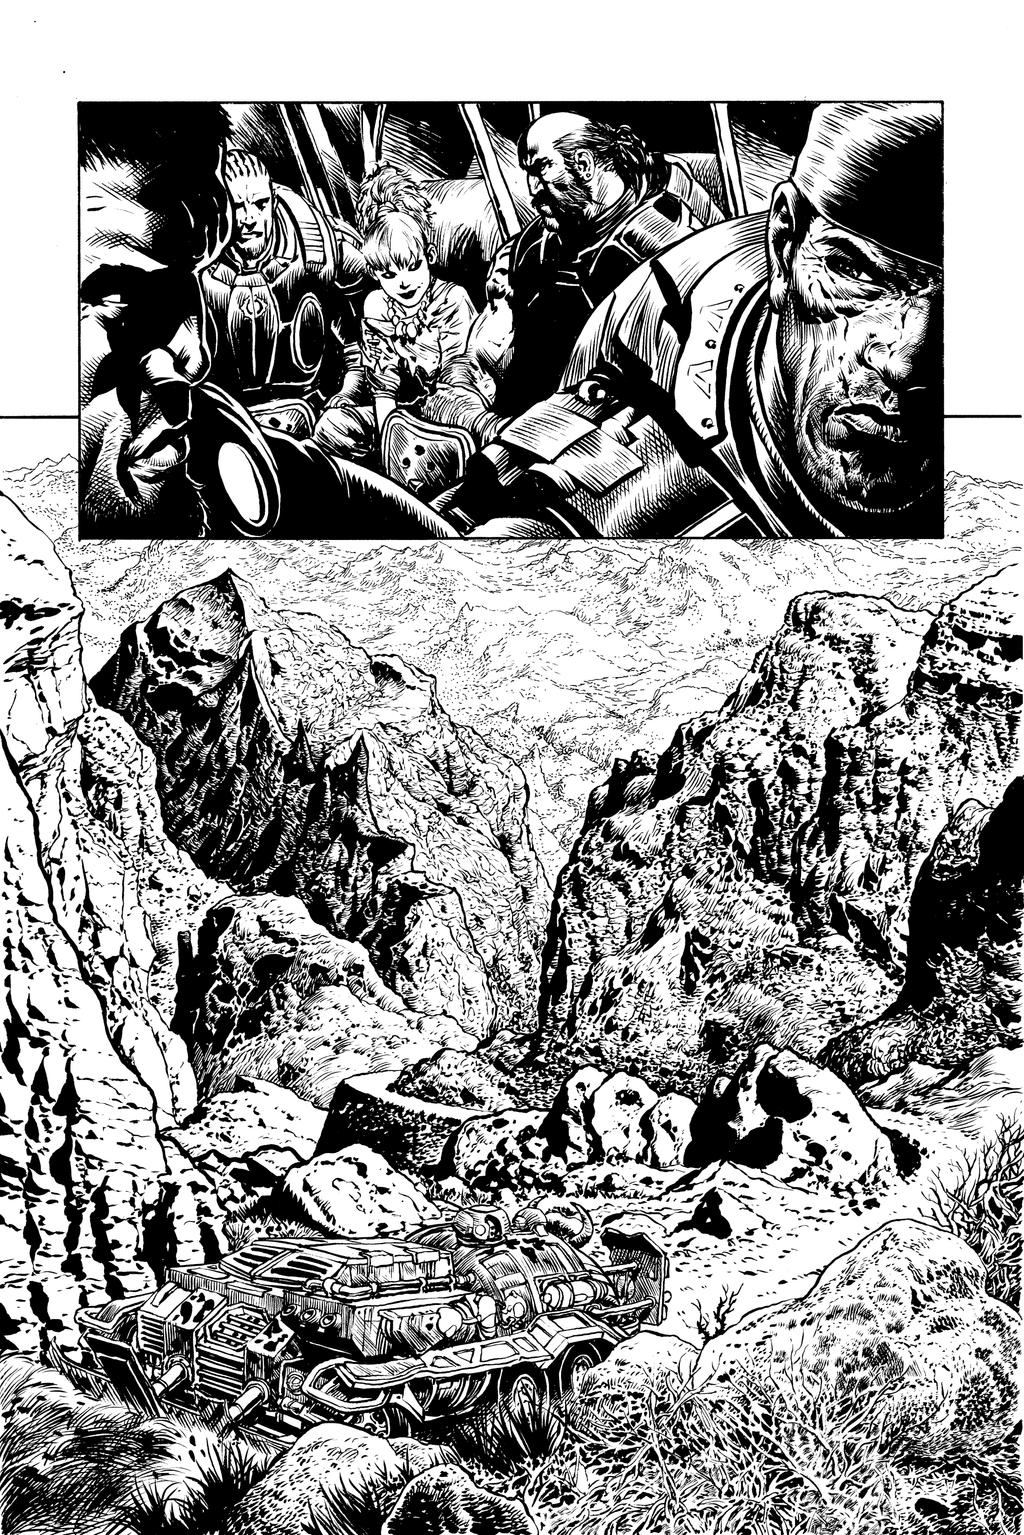 GoW page from issue 3